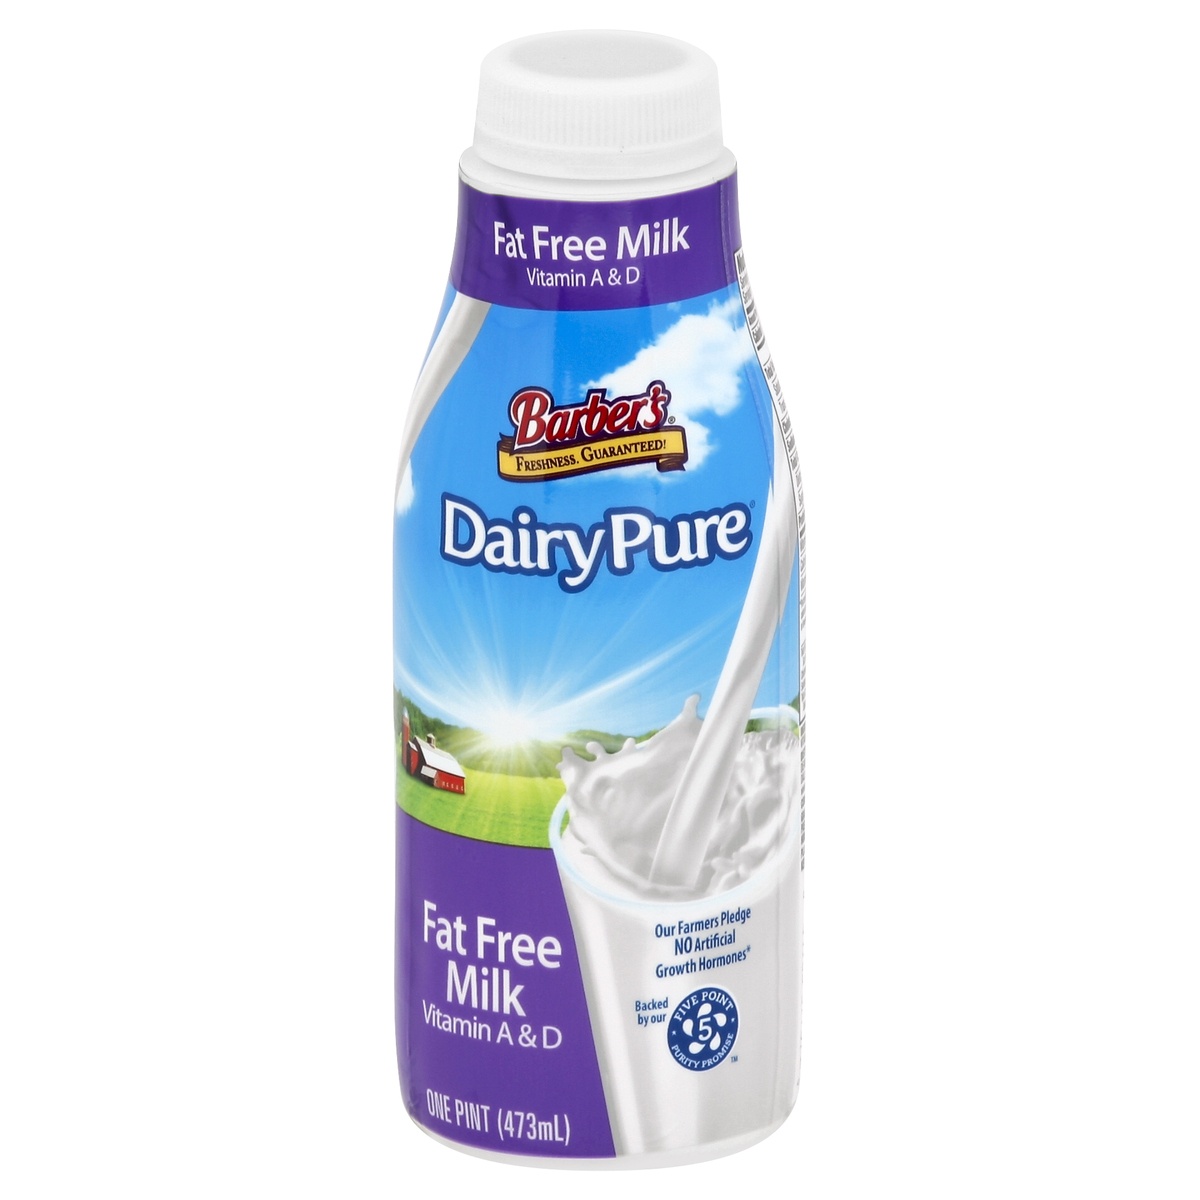 slide 1 of 1, Dairy Pure Fat Free Milk with Vitamin A and Vitamin D, Skim Milk Bottle - 1 Pint, 1 pint